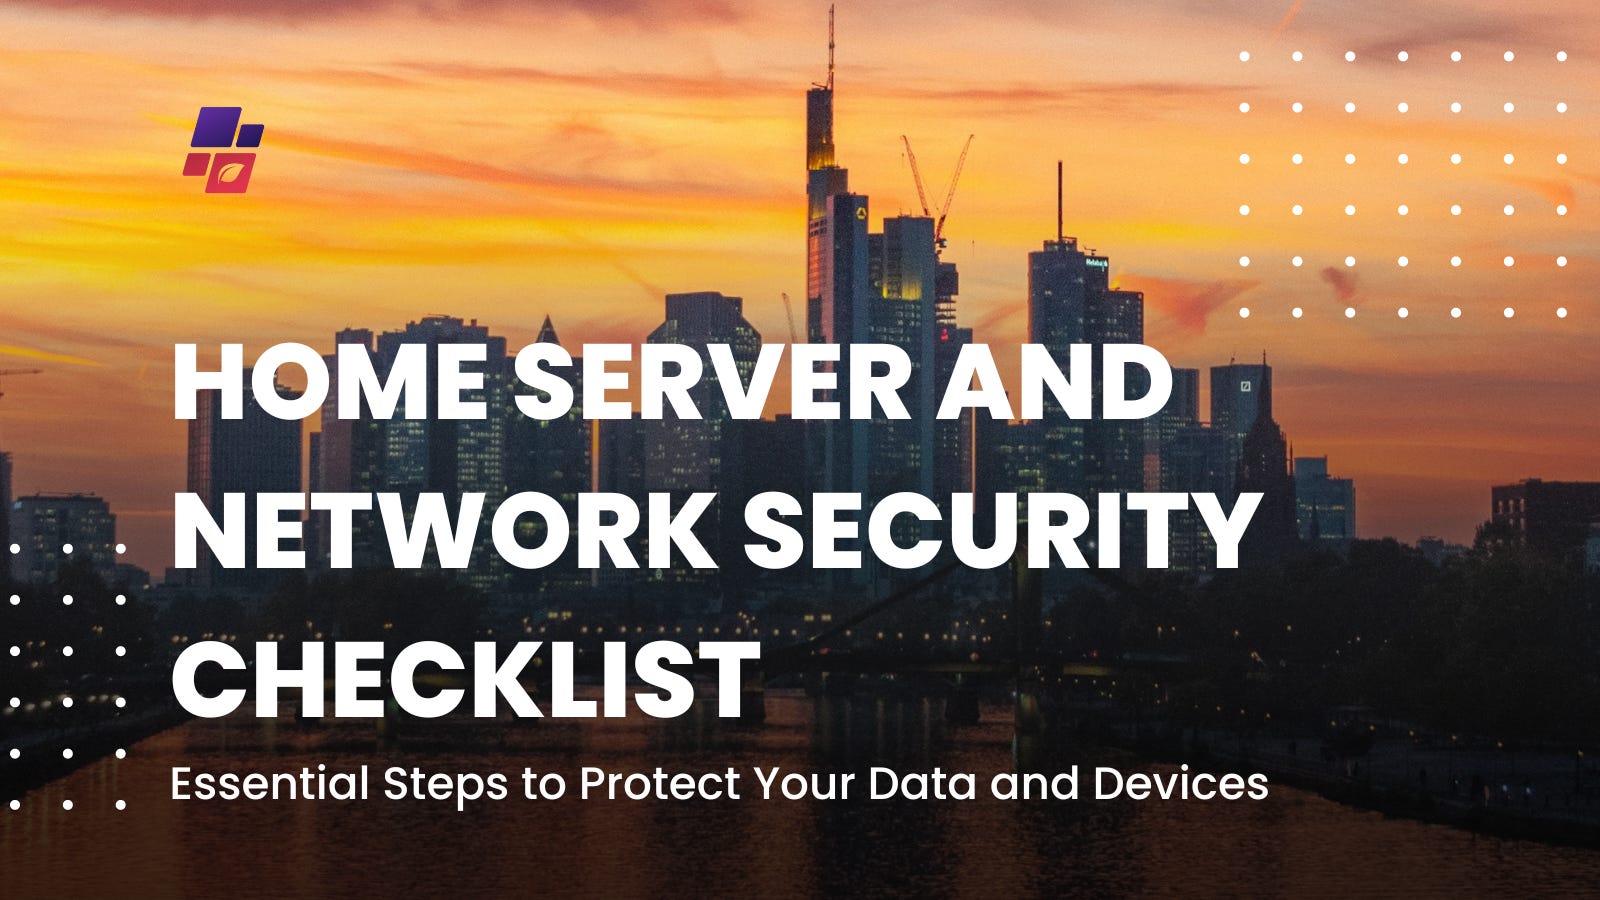 Home Server and Network Security Checklist